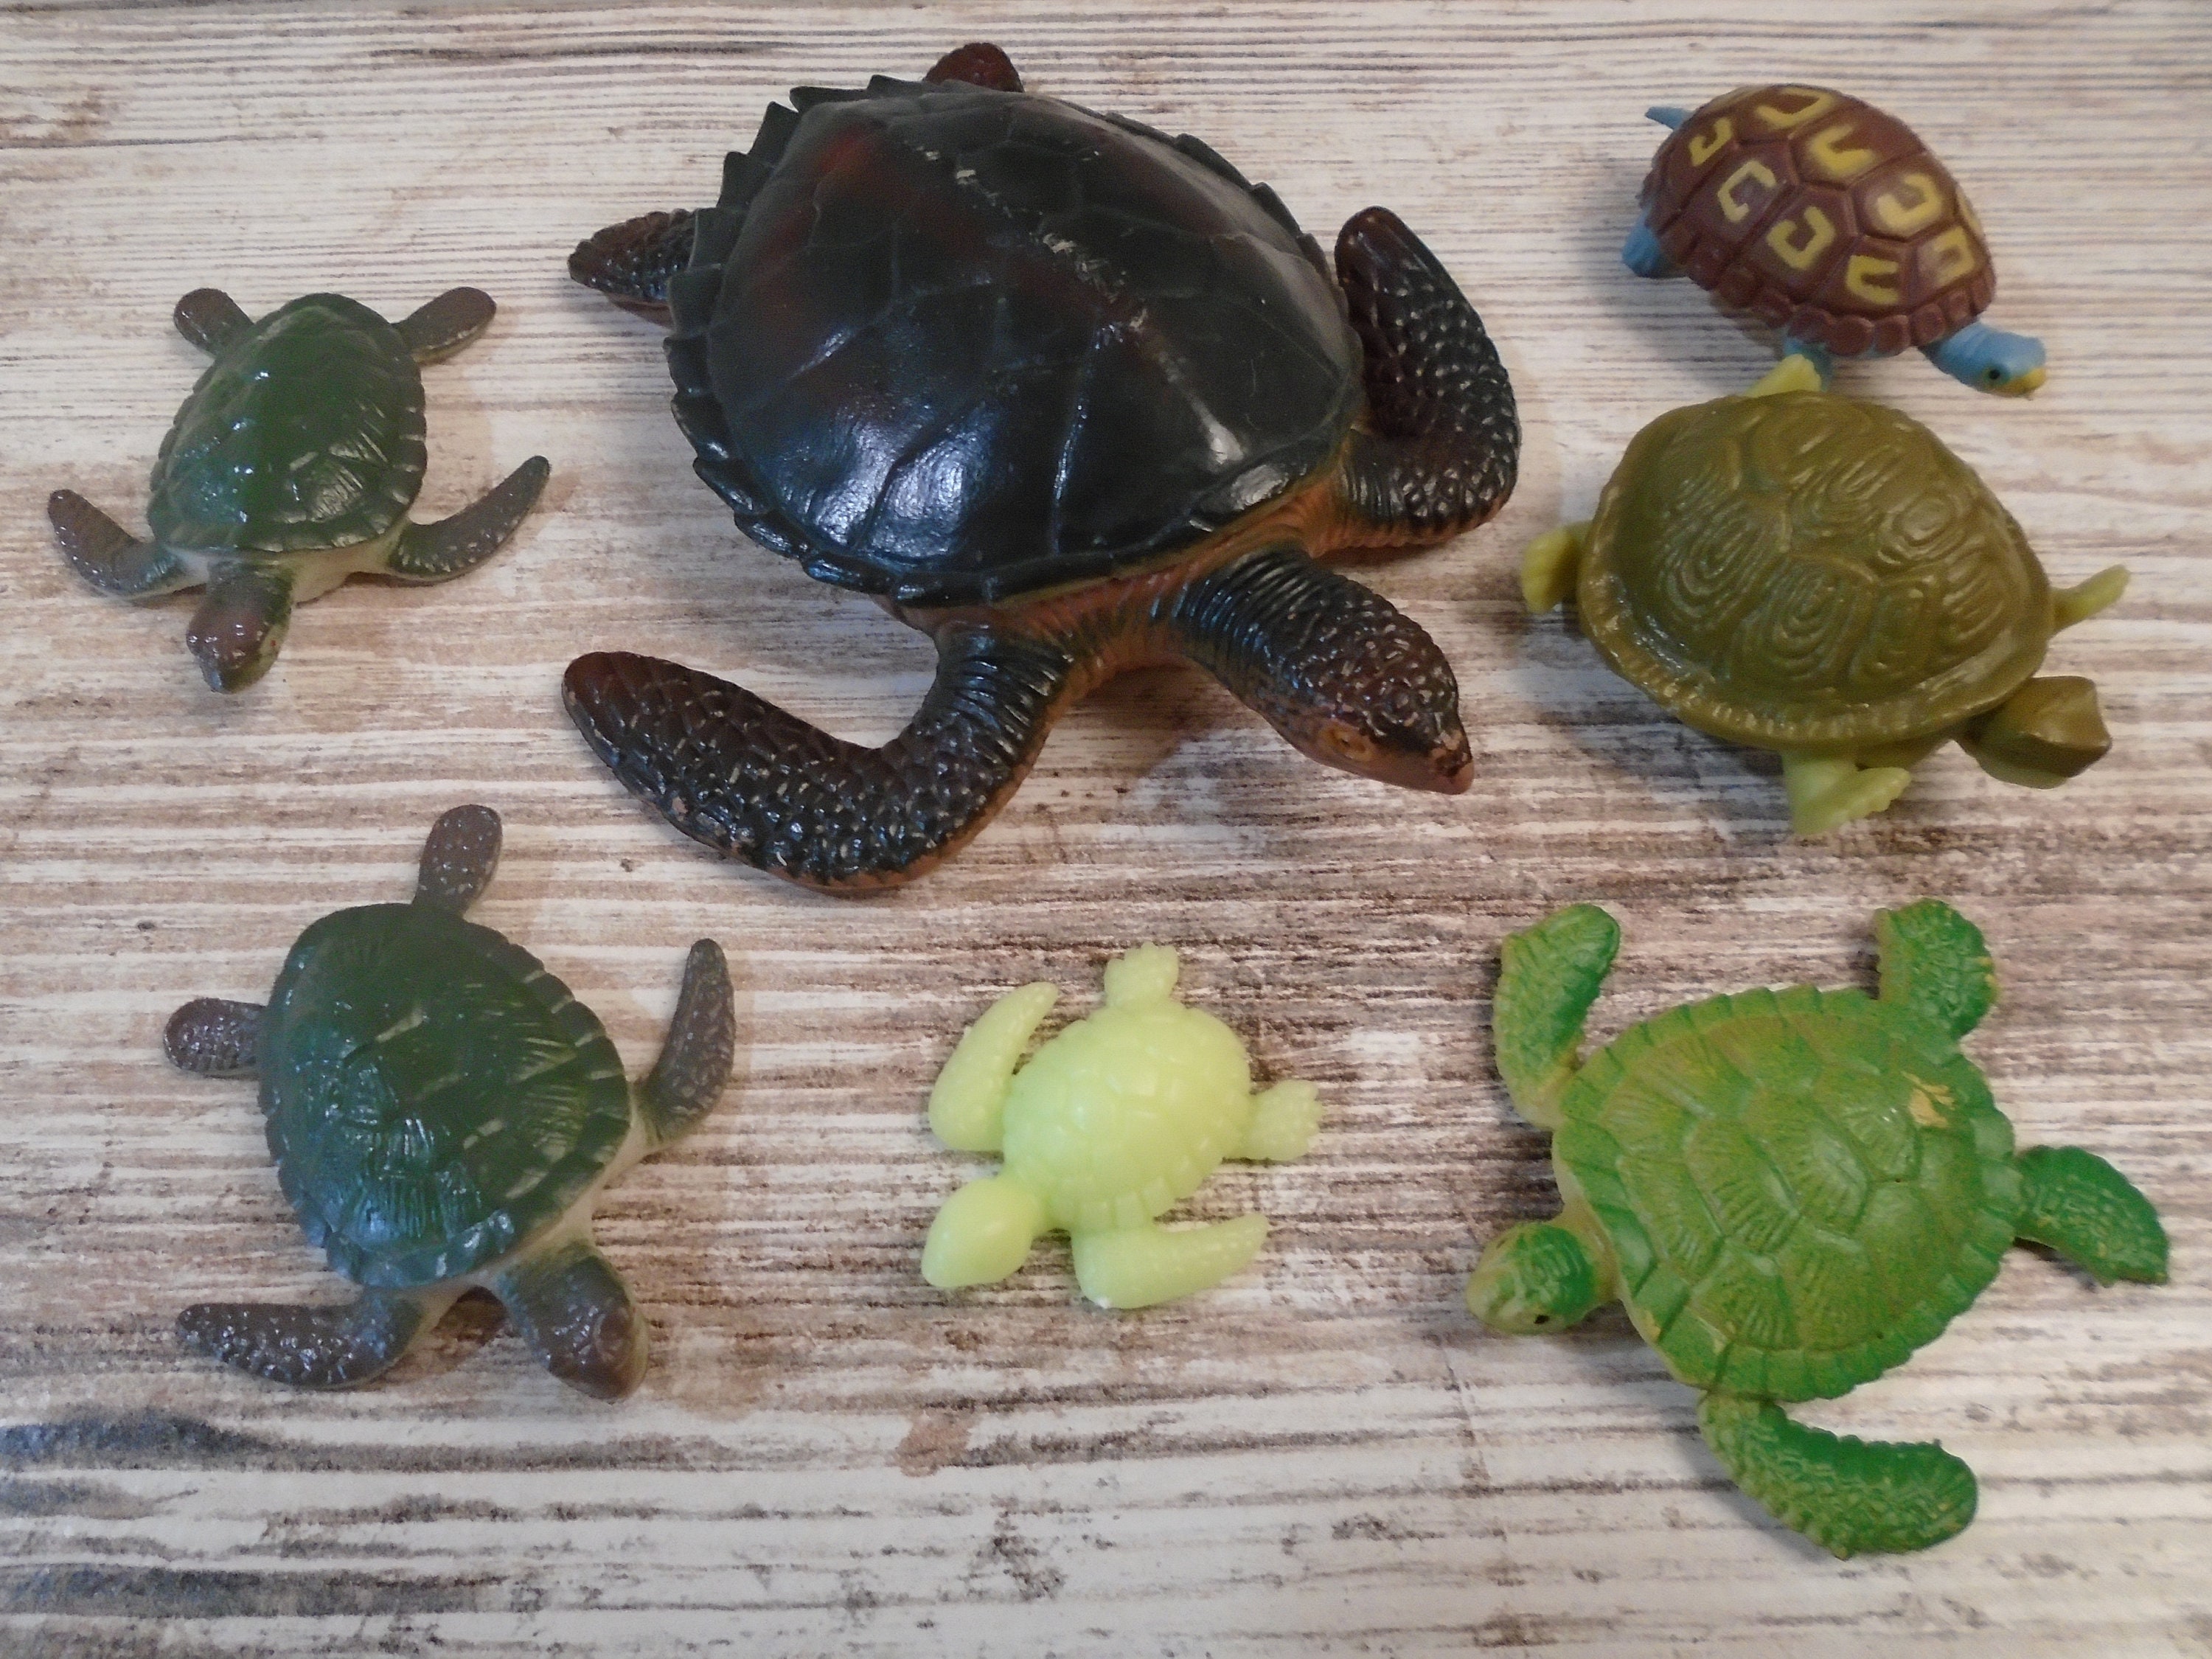 Bememo 16 Pieces Plastic Turtles Party Decorations Small Sea Turtles Toys Realistic Lifelike Plastic Turtle Figurines Fake Tortoises Ocean Animal for Birthday Party Favor Decoration 